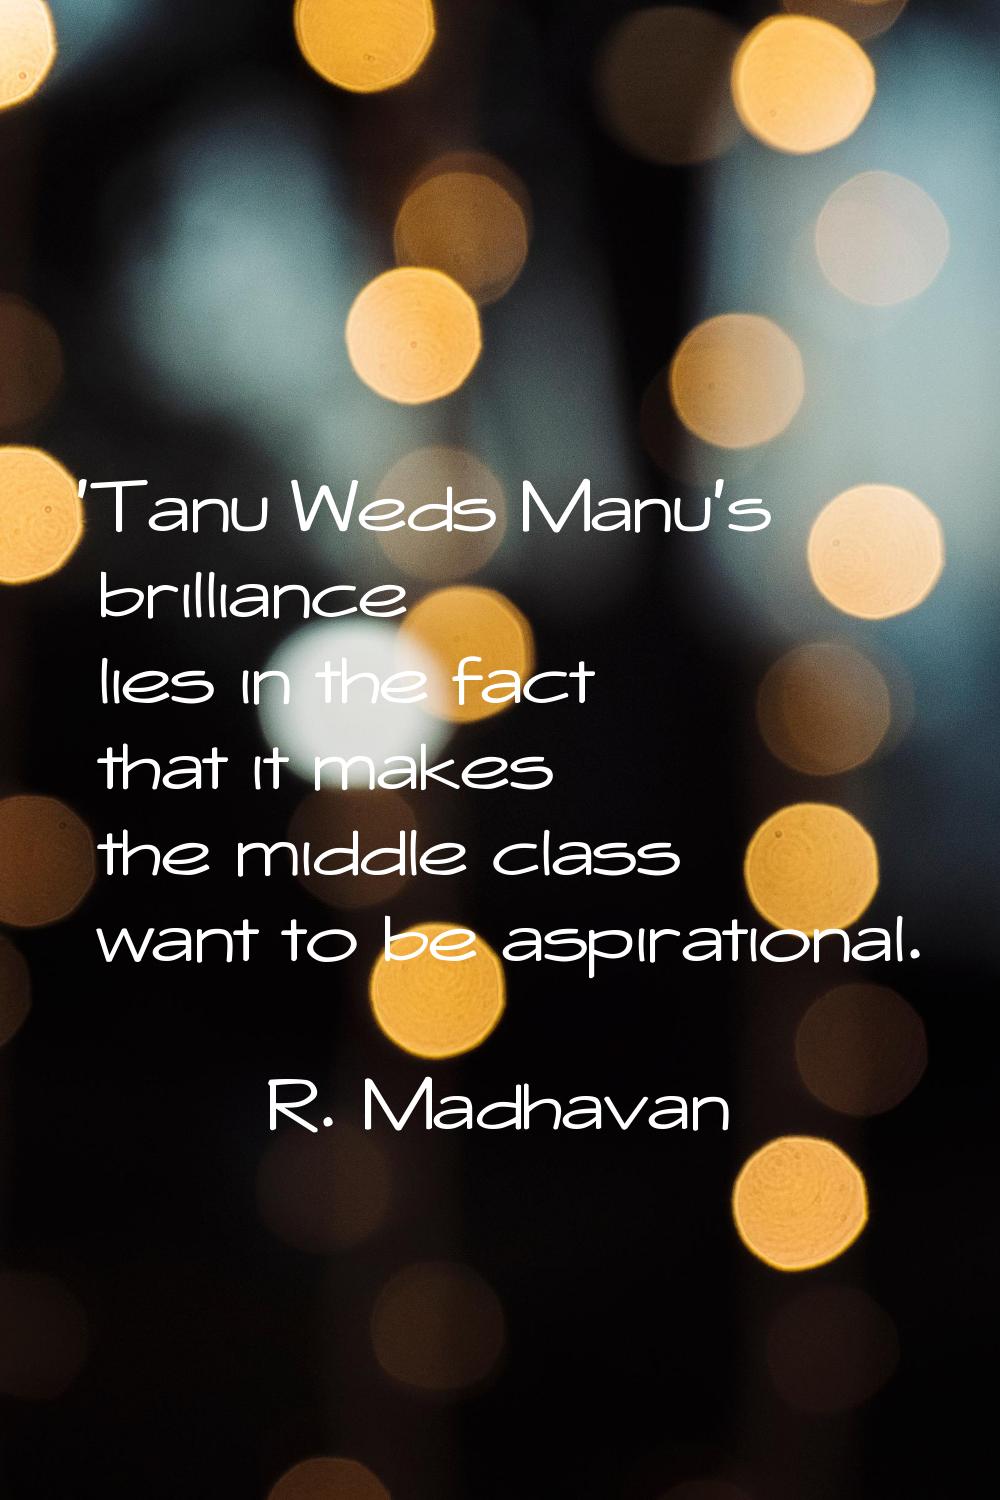 'Tanu Weds Manu's brilliance lies in the fact that it makes the middle class want to be aspirationa